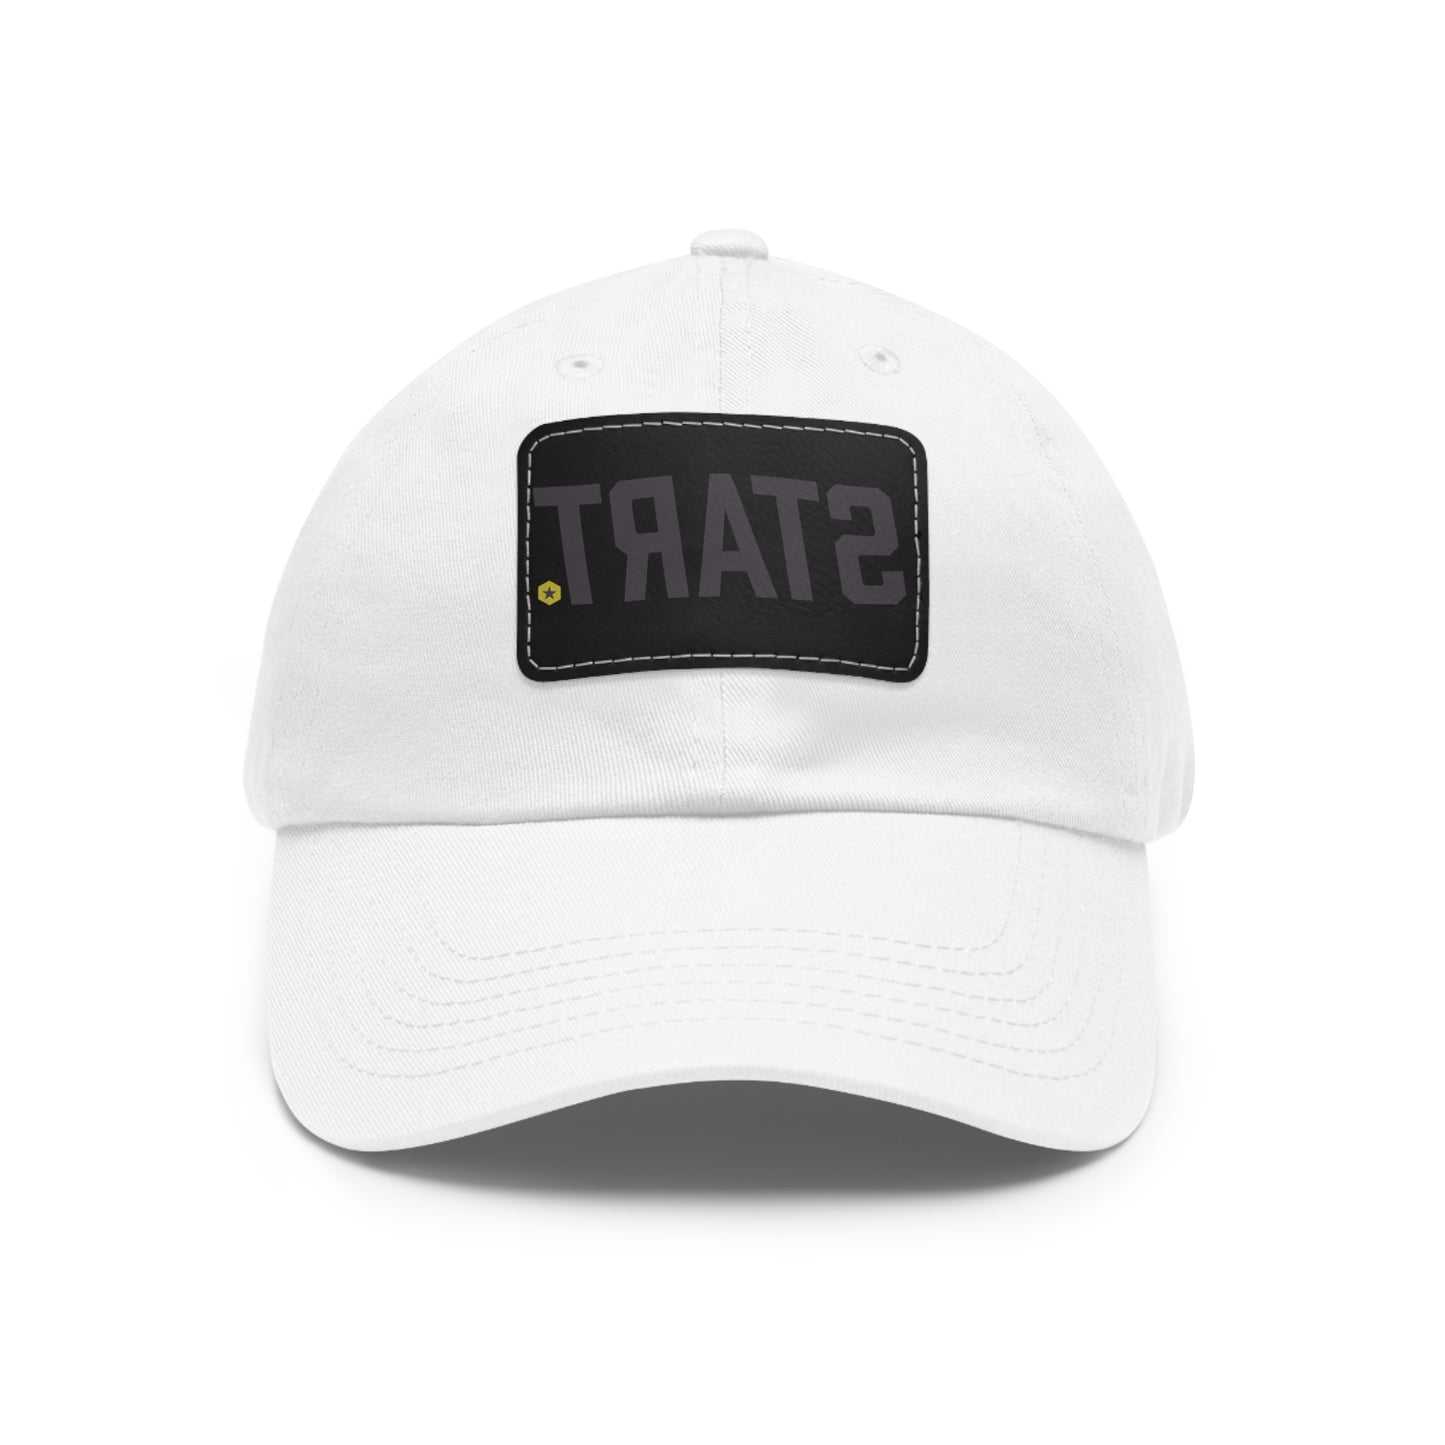 Start Hat with Leather Patch